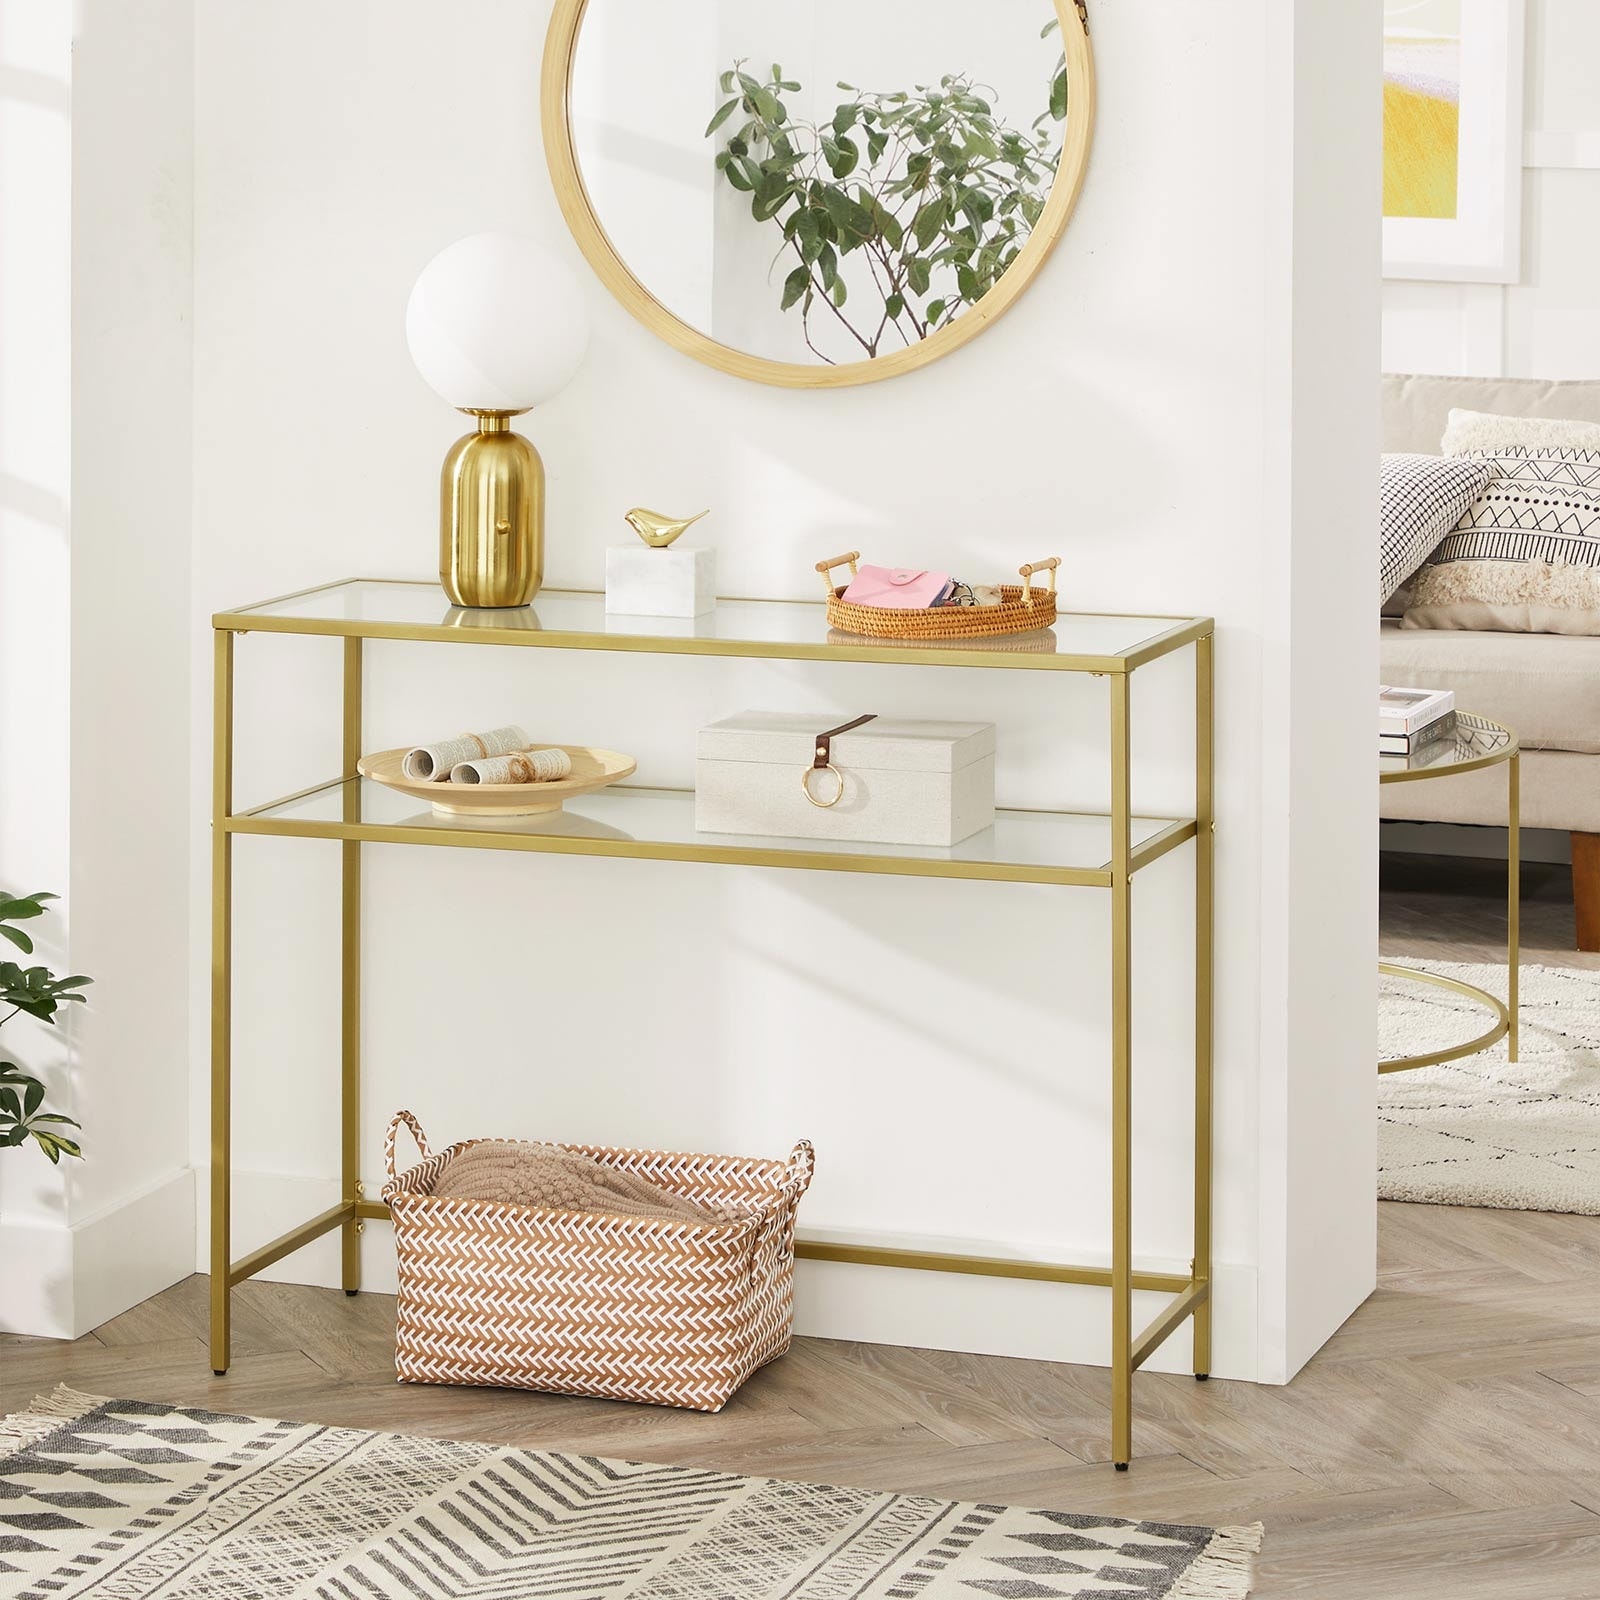 VASAGLE 39.4 Console Sofa Table Glass Gold Entryway Table 2 Shelves  Adjustable Feet Metal Frame for Living Room